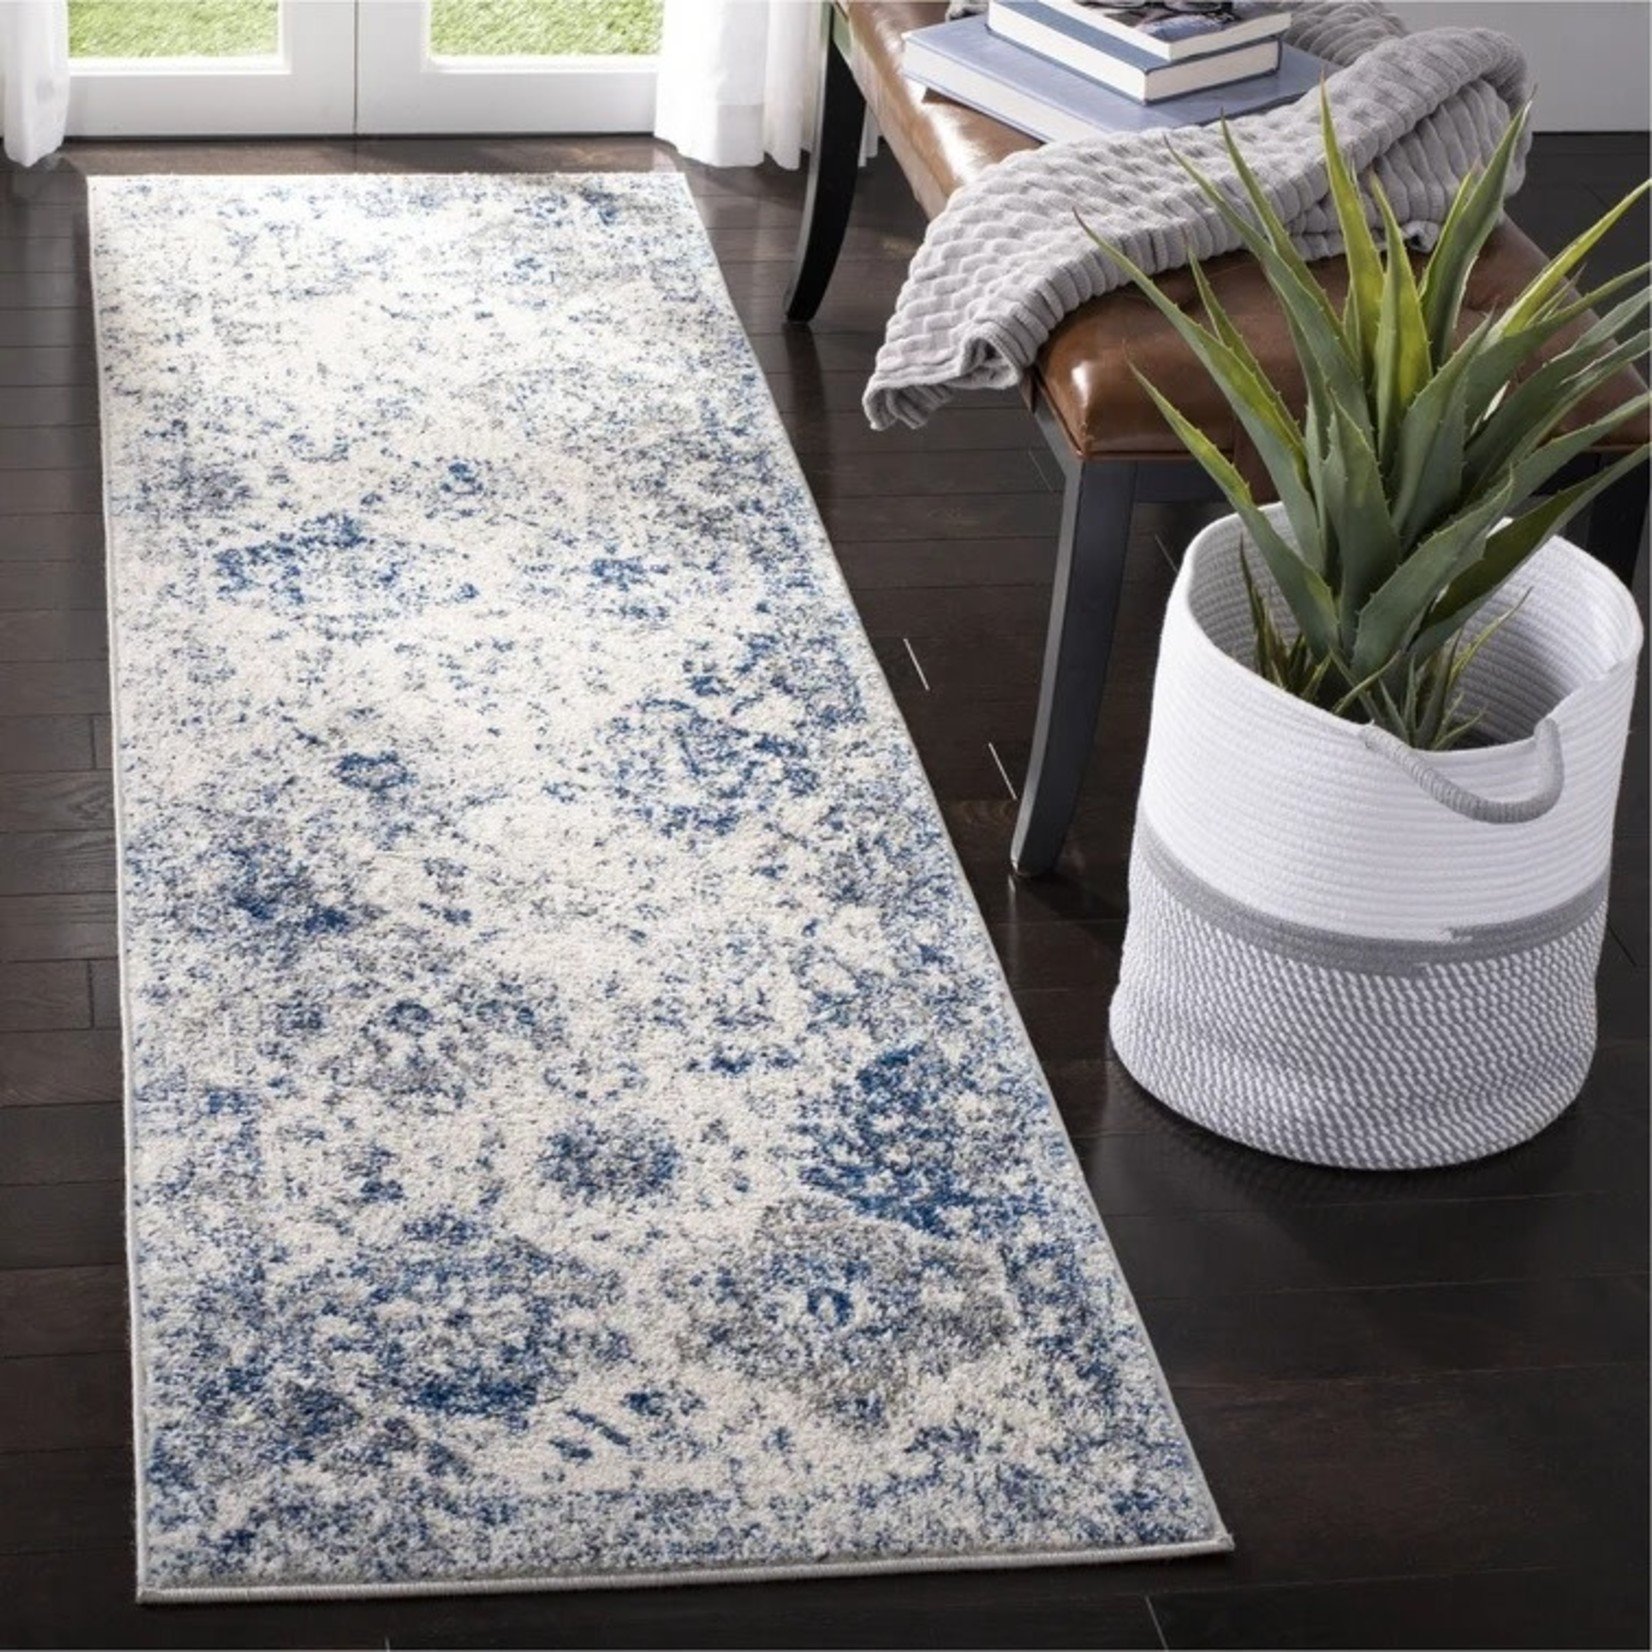 *2'3" x 14' Harty Oriental White/Royal Blue Area Rug